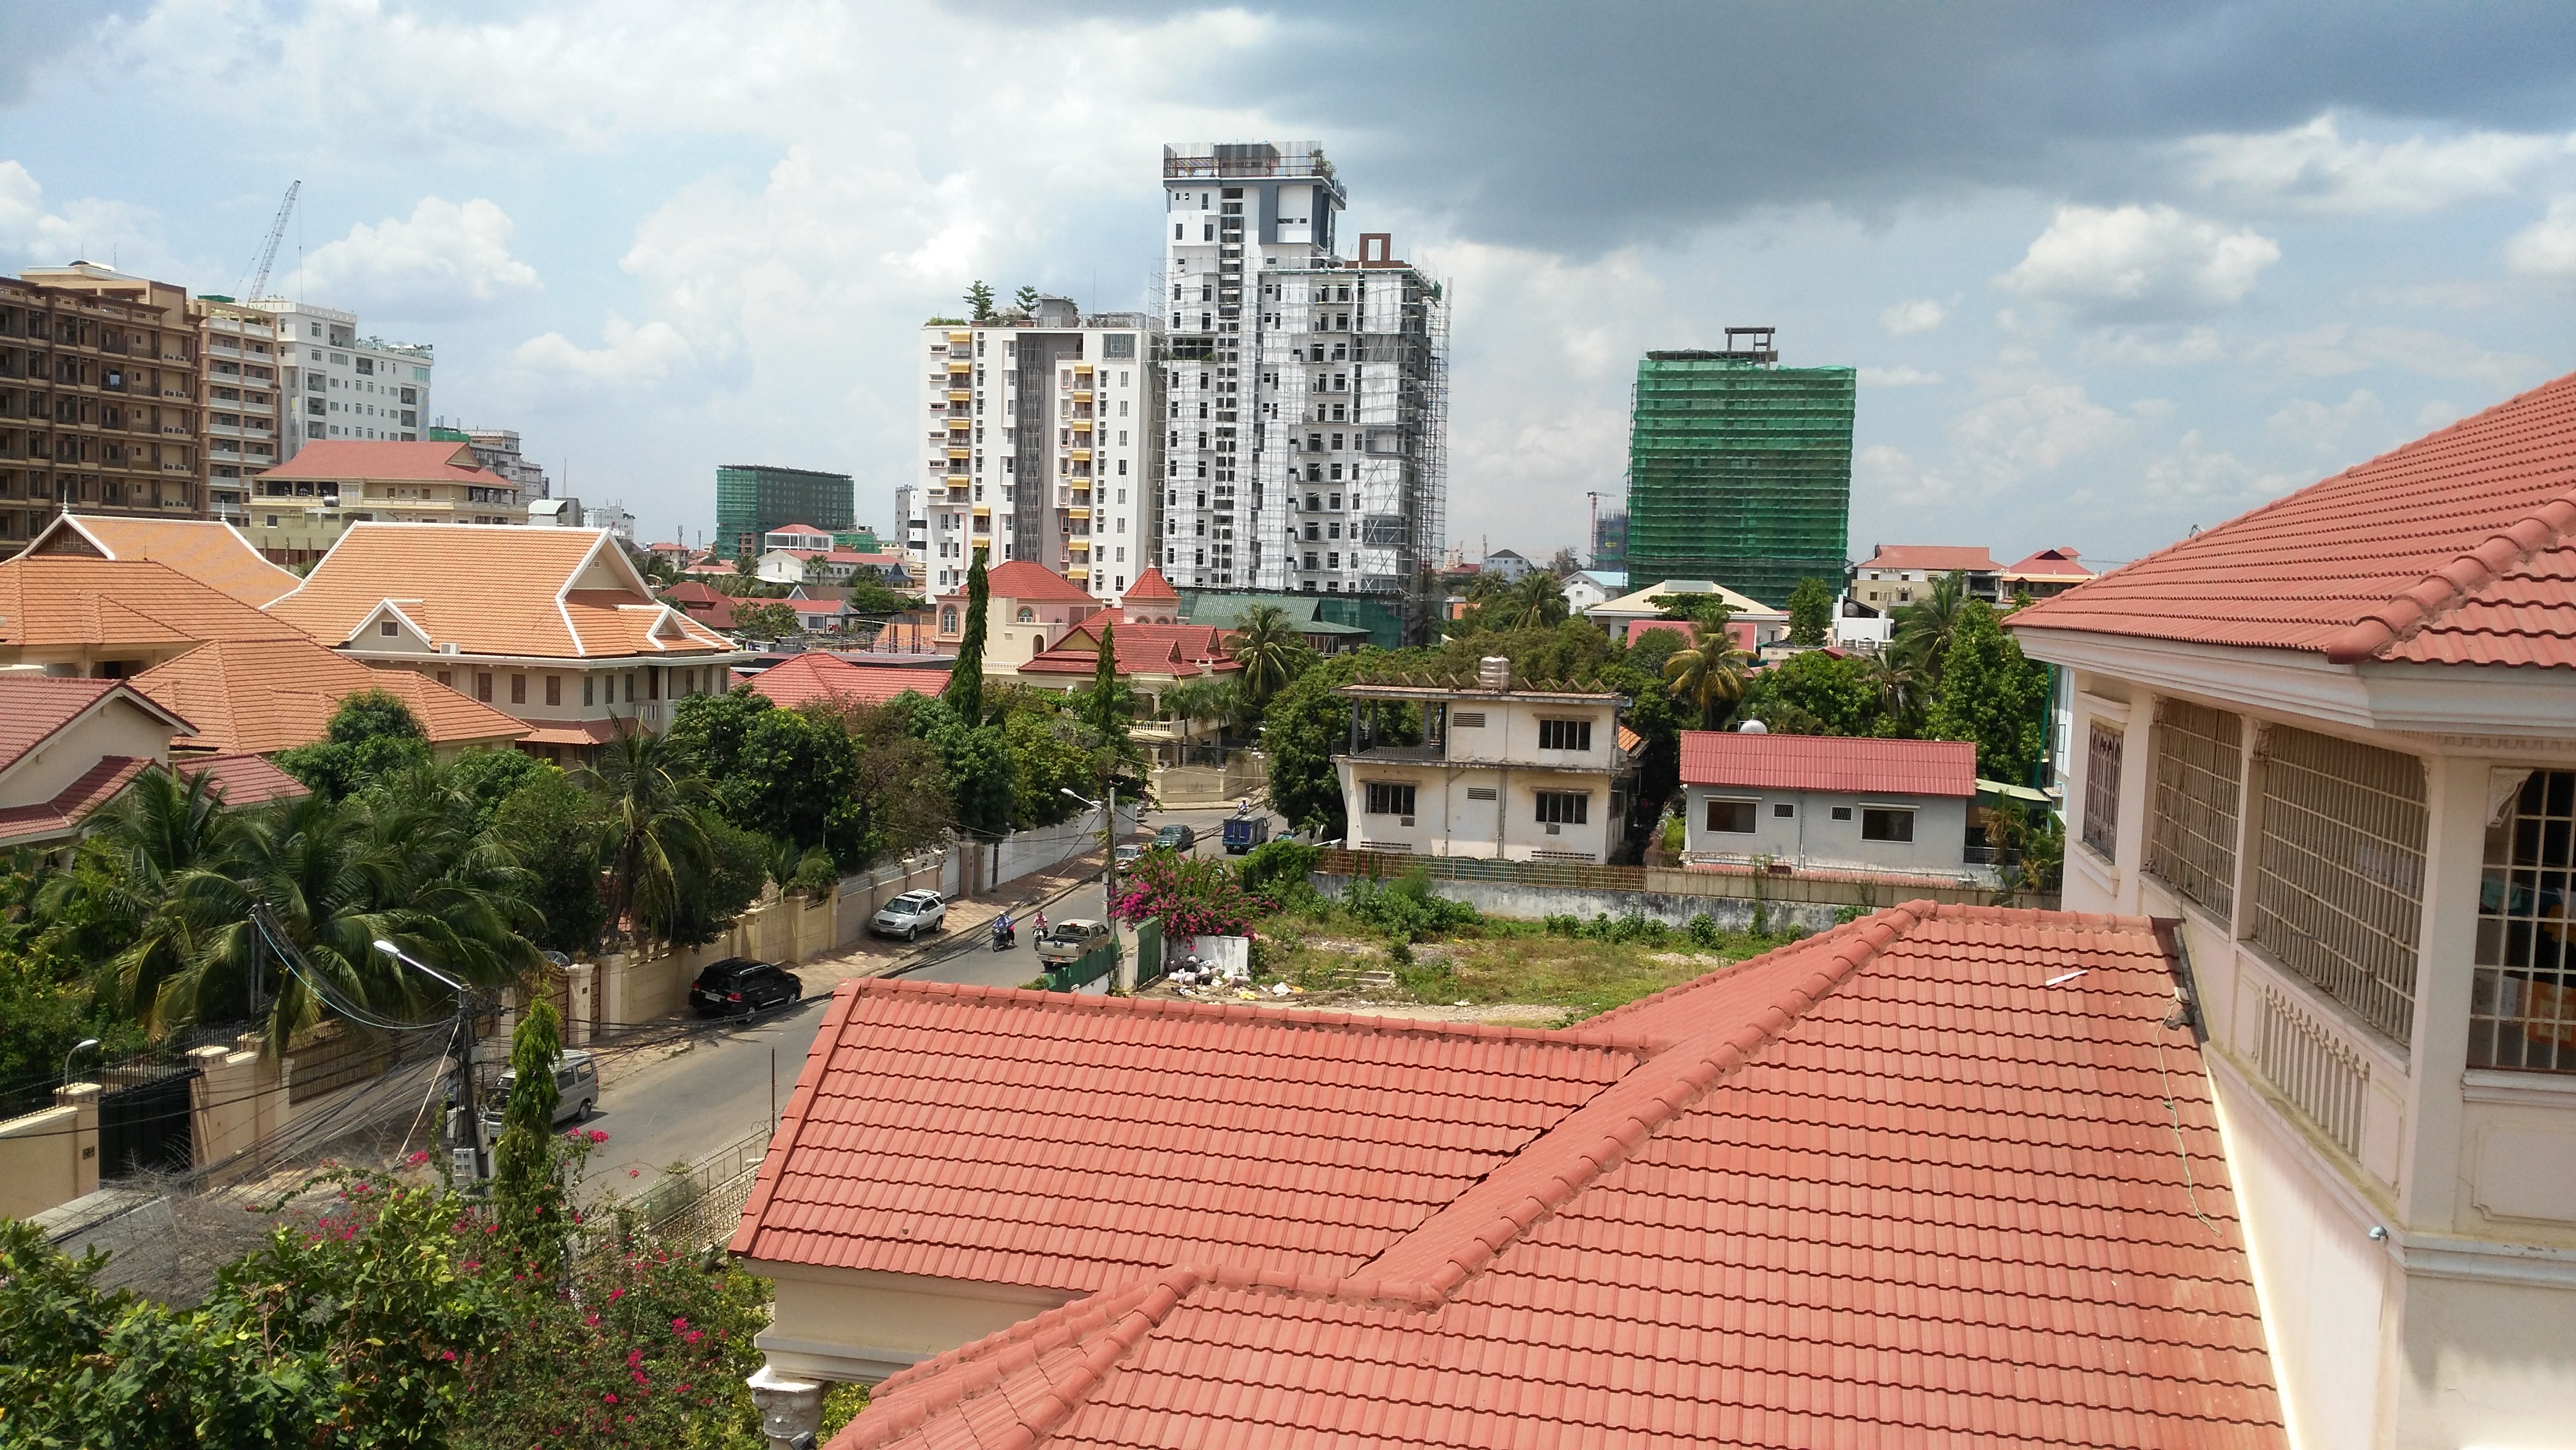 View of Phnom Penh from my apartment